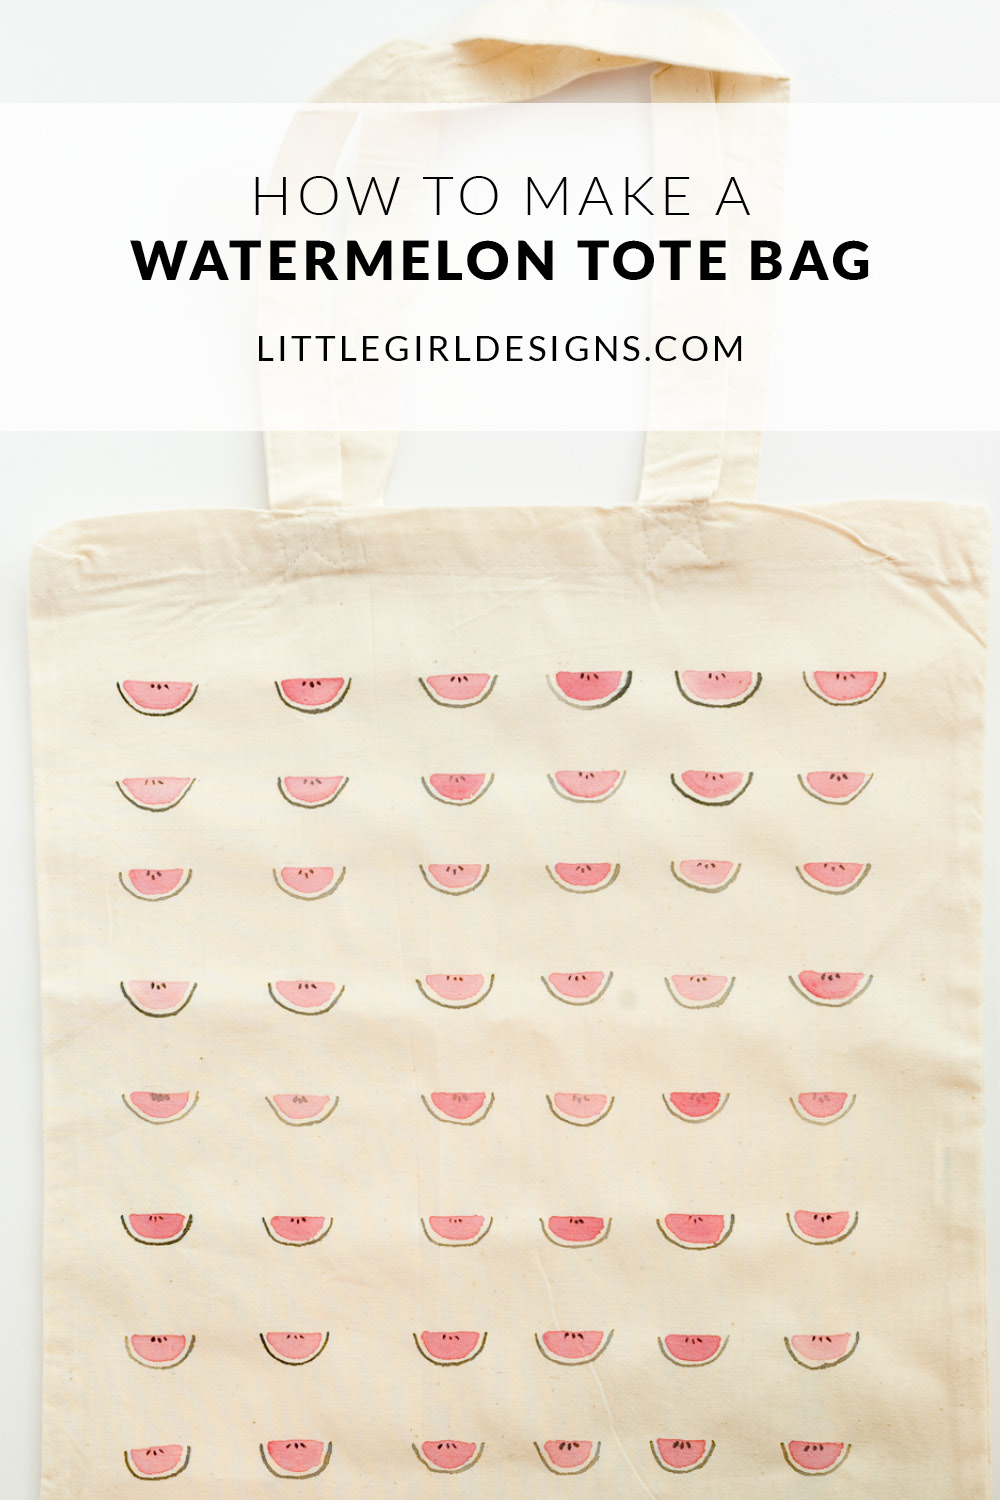 How to Make a Watermelon Tote Bag